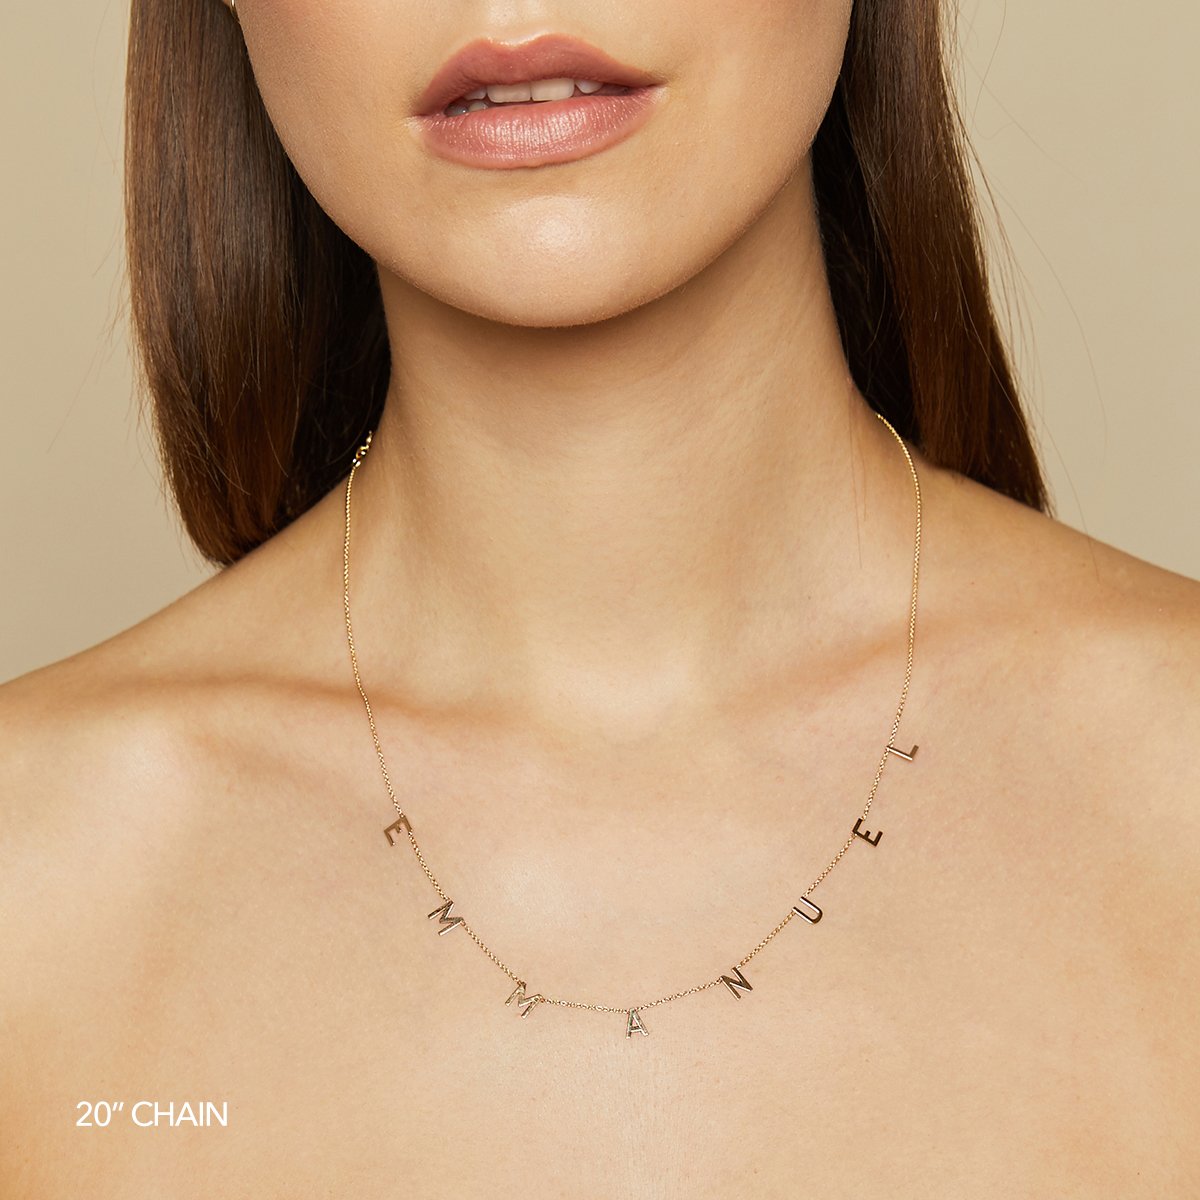 THE ORIGINAL SPACED LETTER NECKLACE - Large®